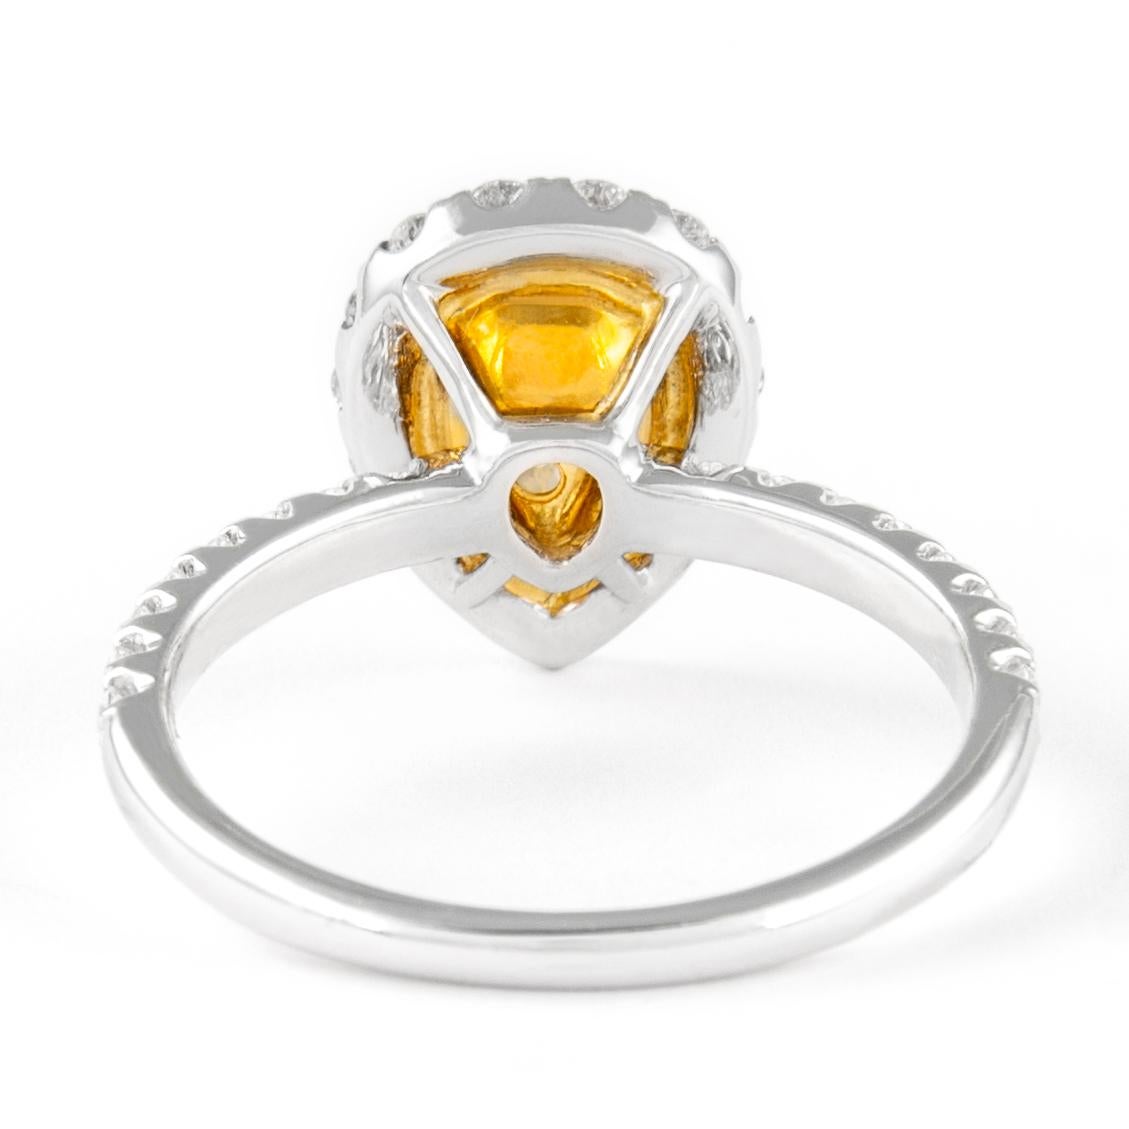 Alexander GIA 1.03ct Fancy Intense Orange-Yellow Pear Diamond with Halo Ring 18k In New Condition For Sale In BEVERLY HILLS, CA